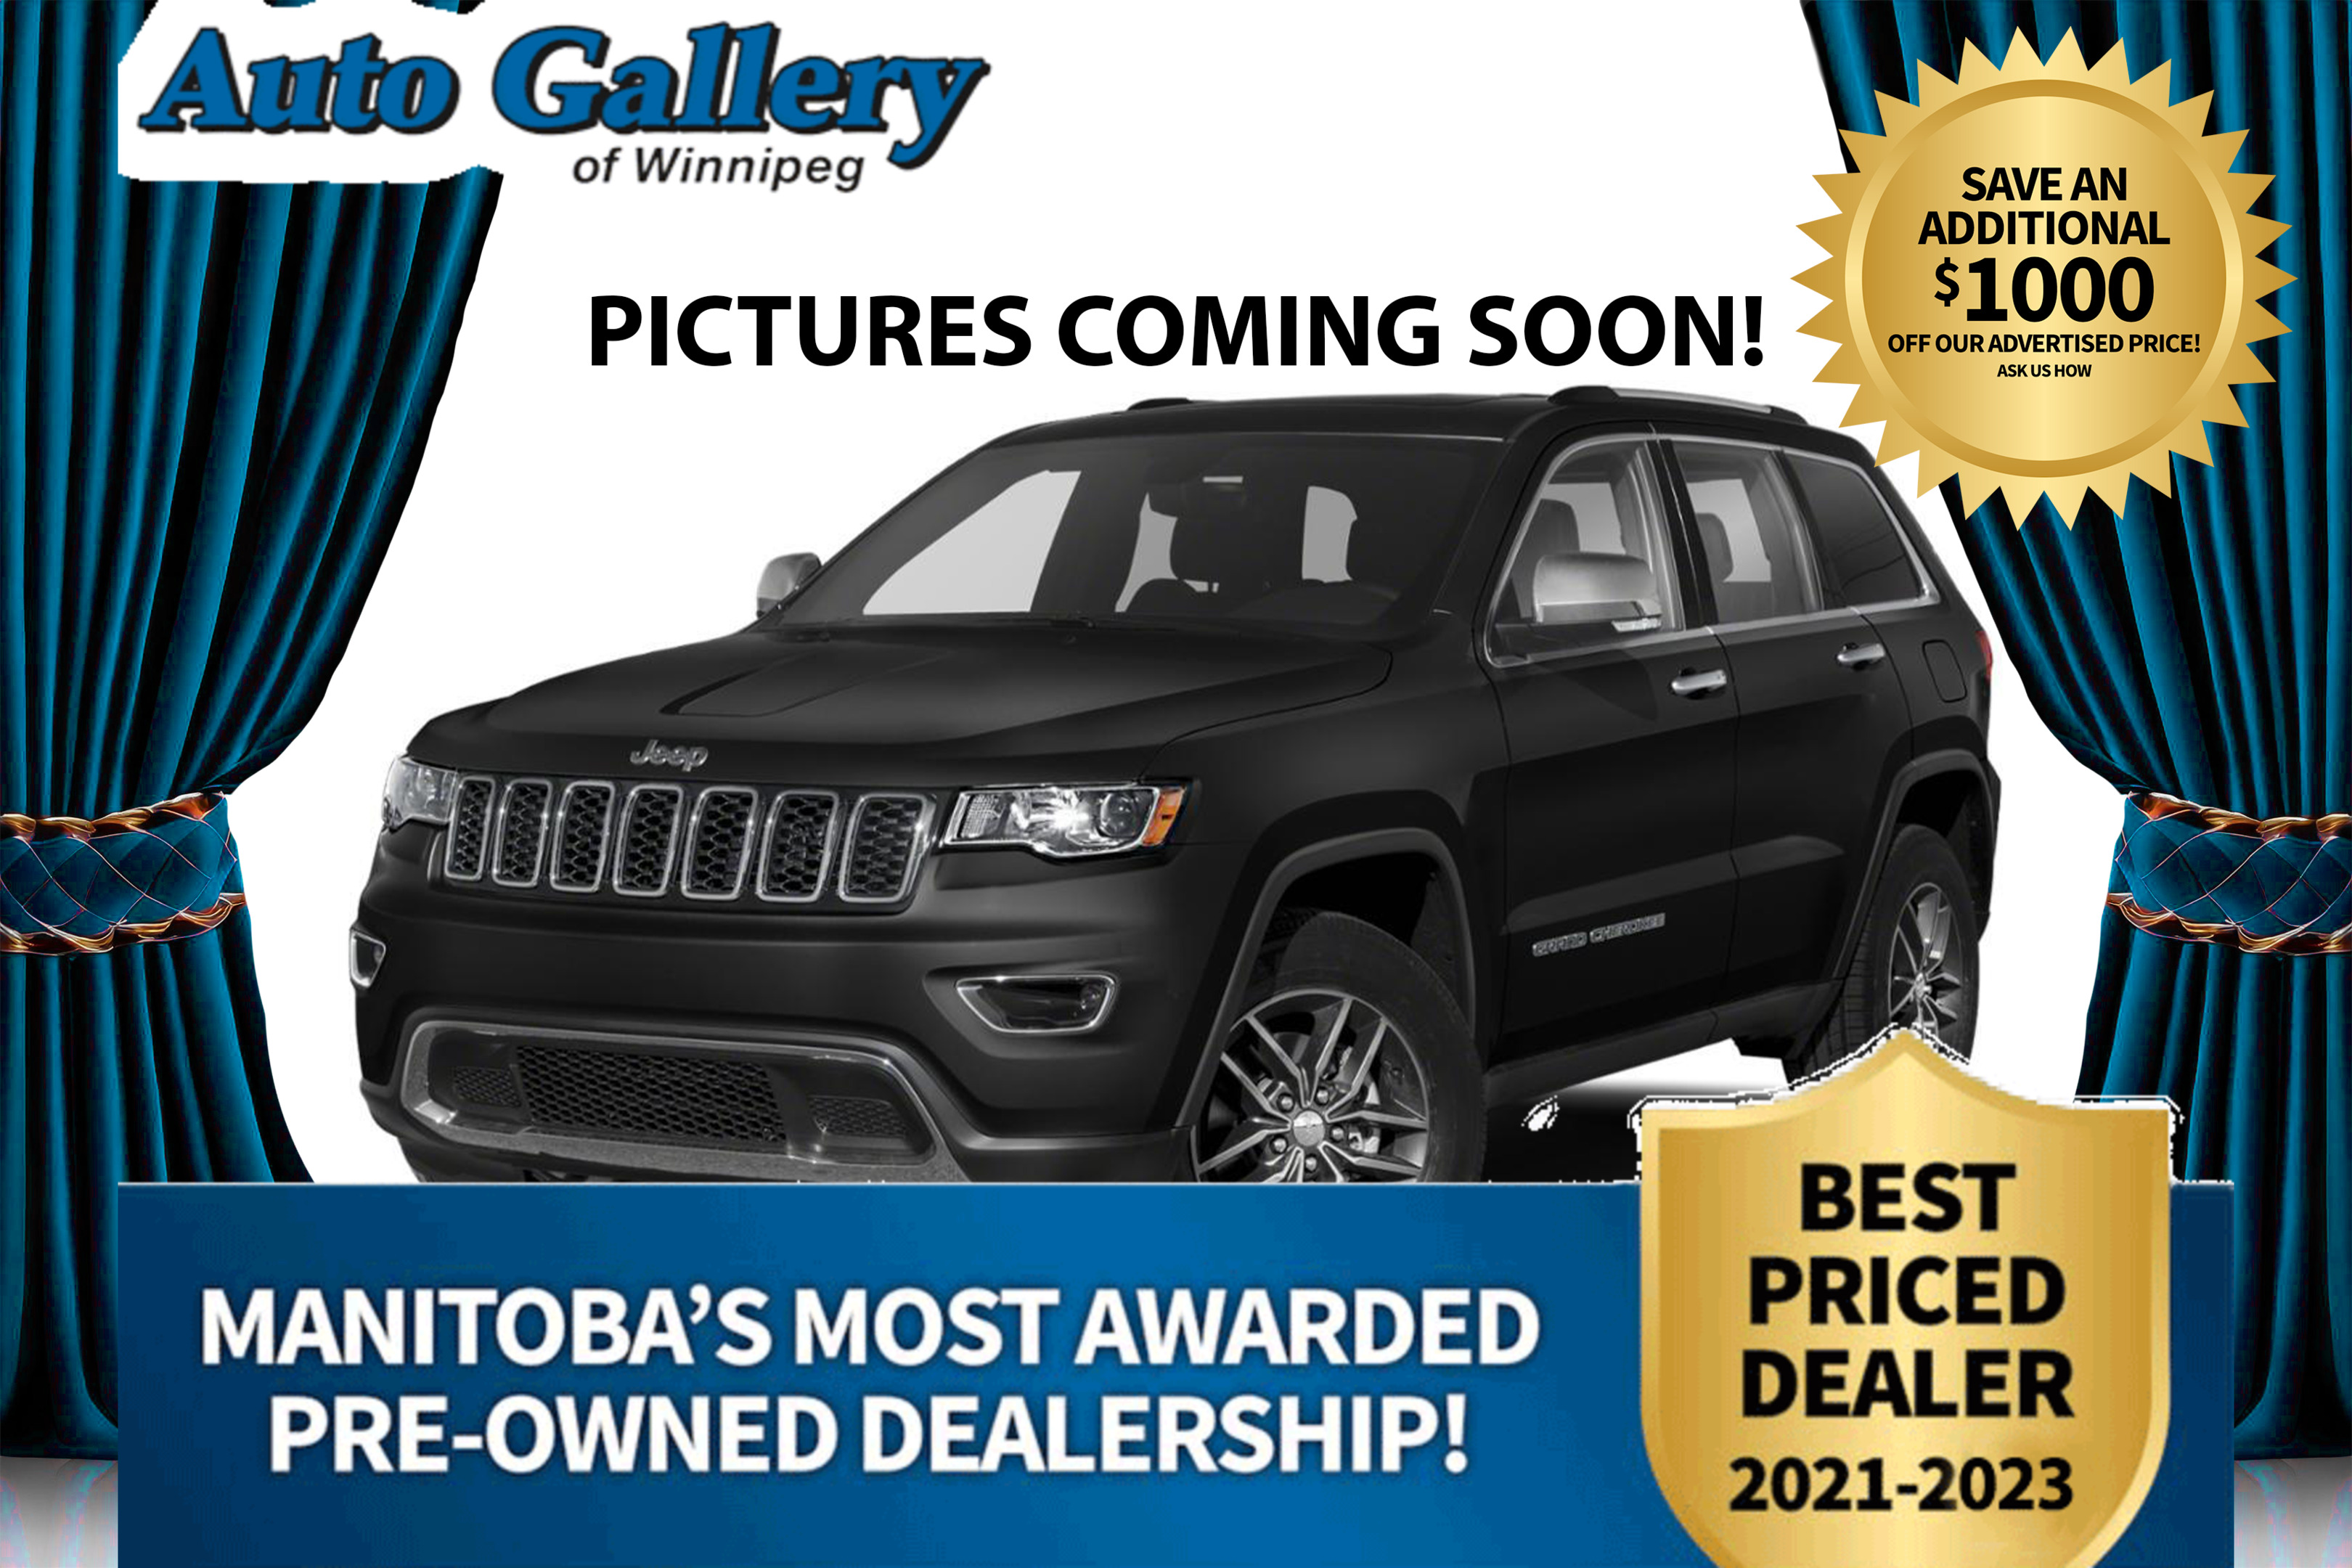 2018 Jeep Grand Cherokee Limited 4x4, SUNROOF, TOW PACKAGE, HTD/CLD SEATS!